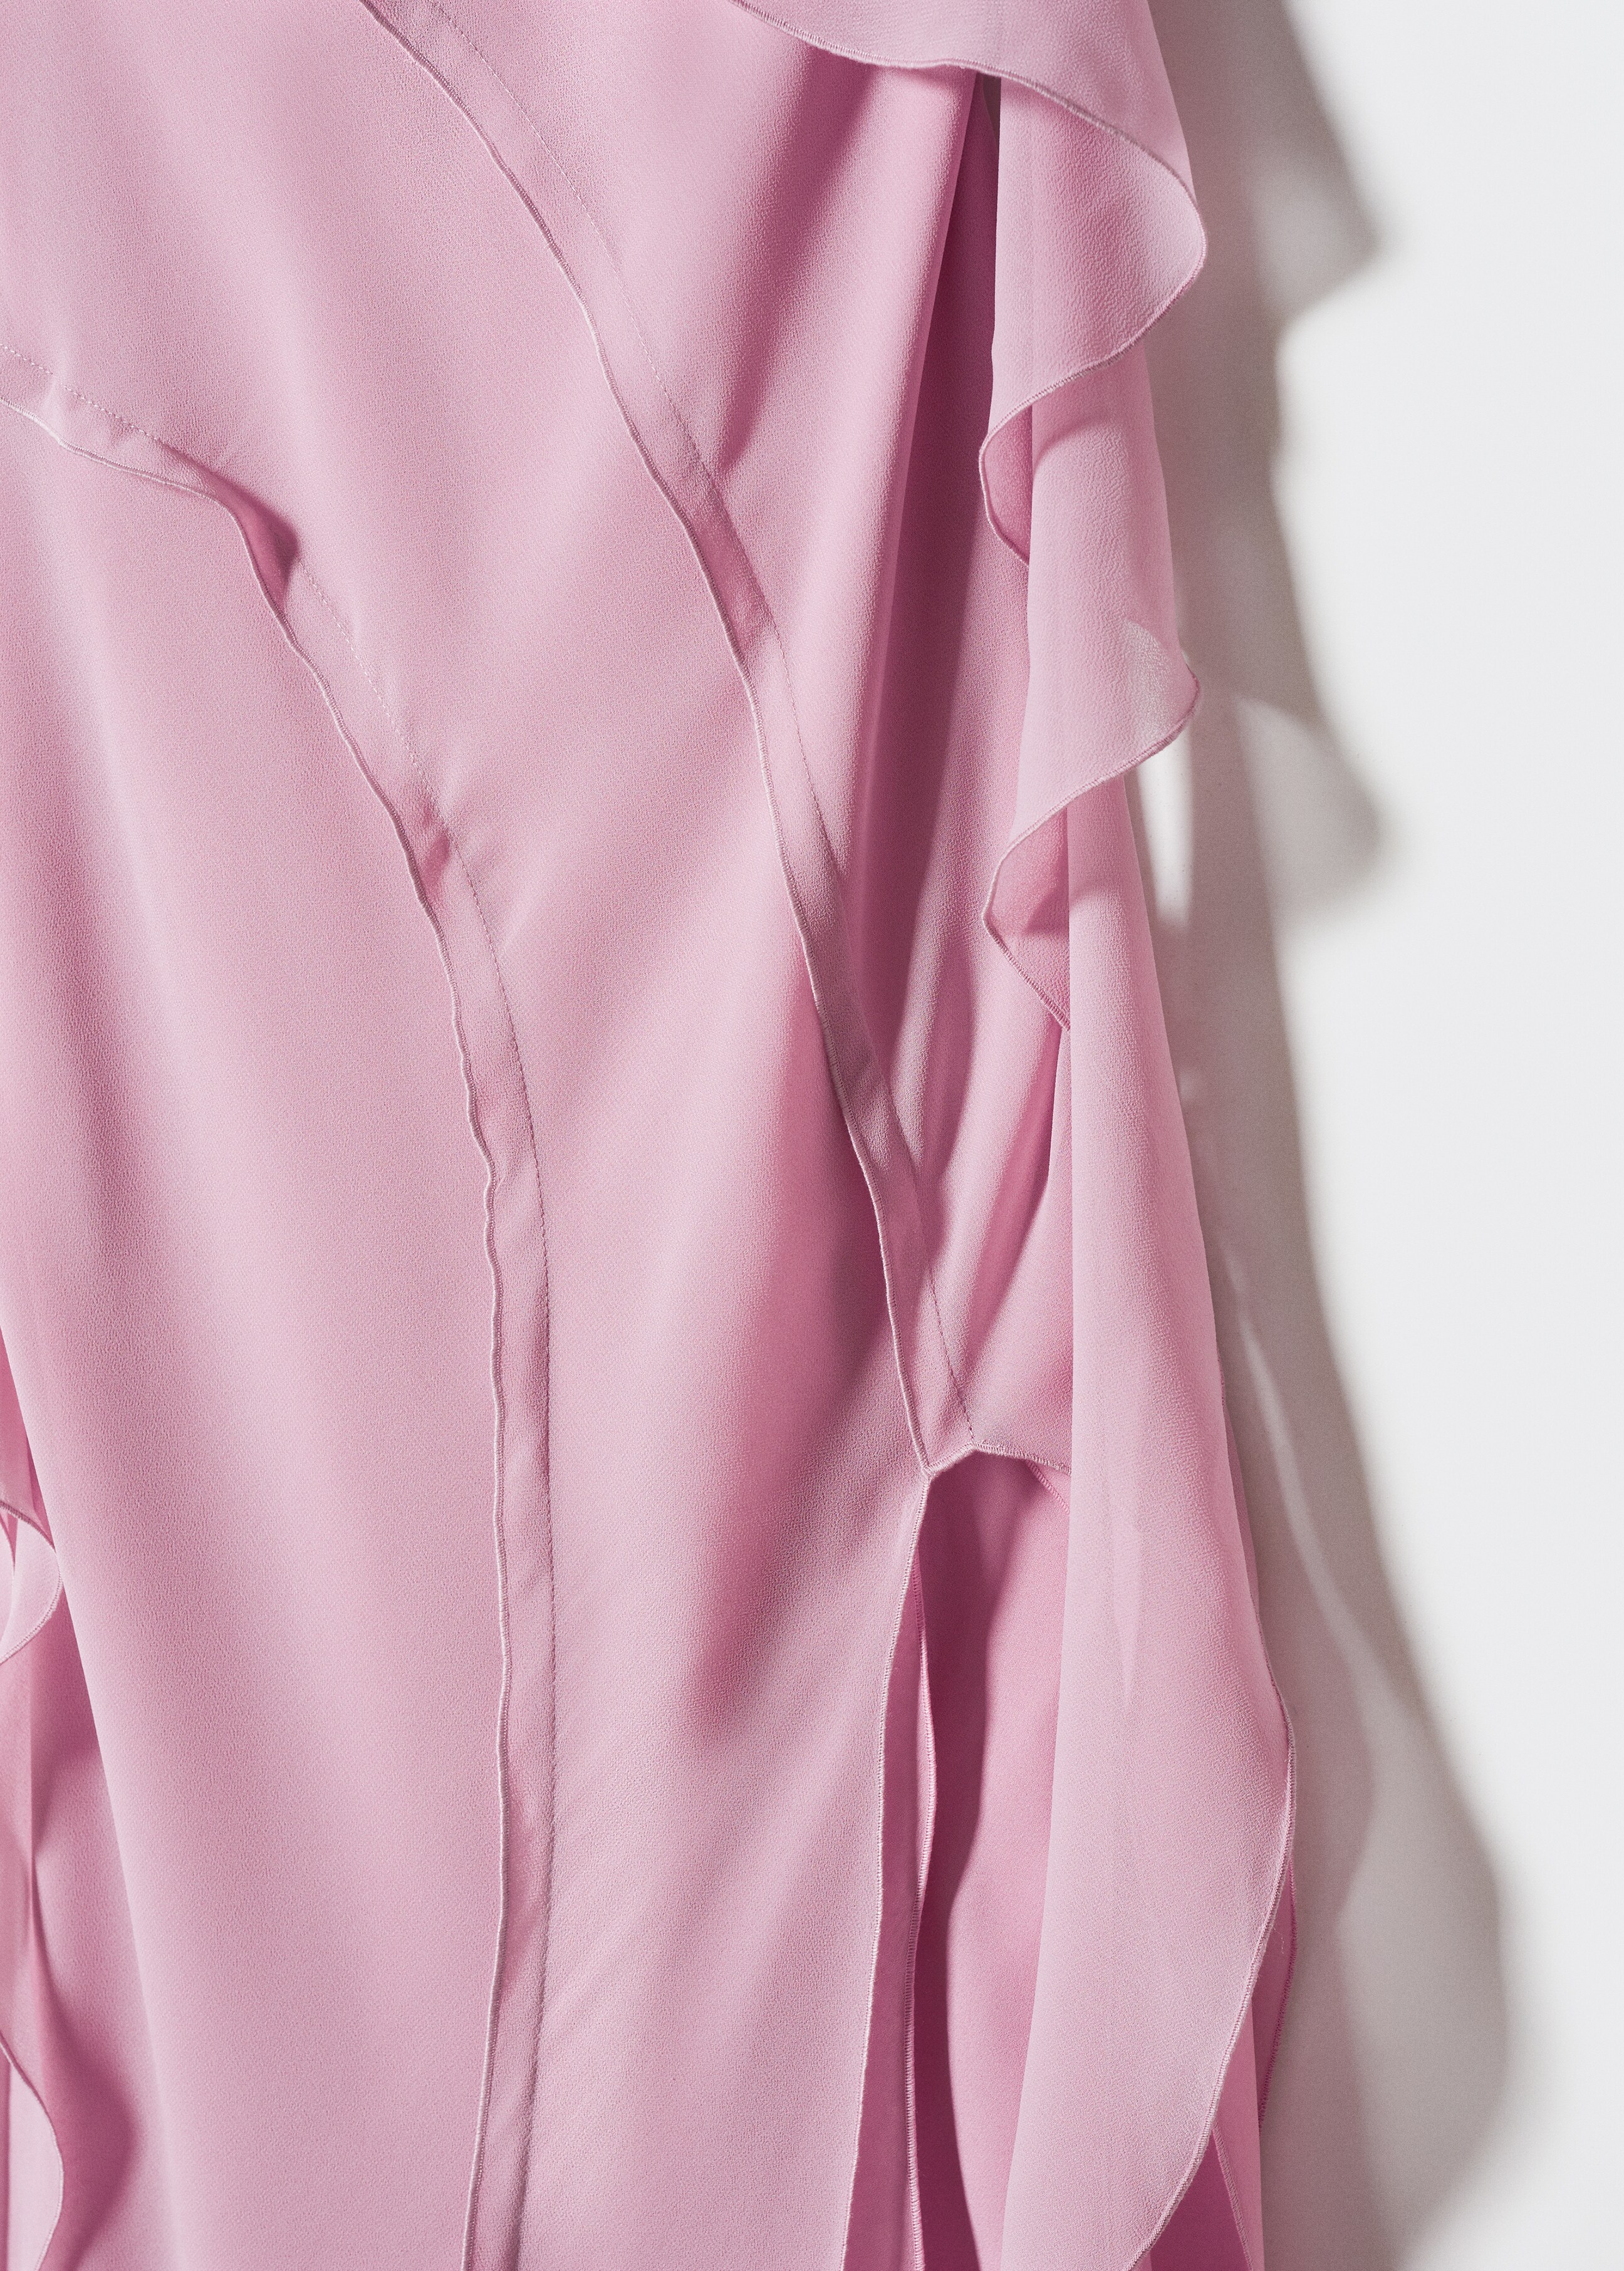 Ruffles slit dress - Details of the article 8